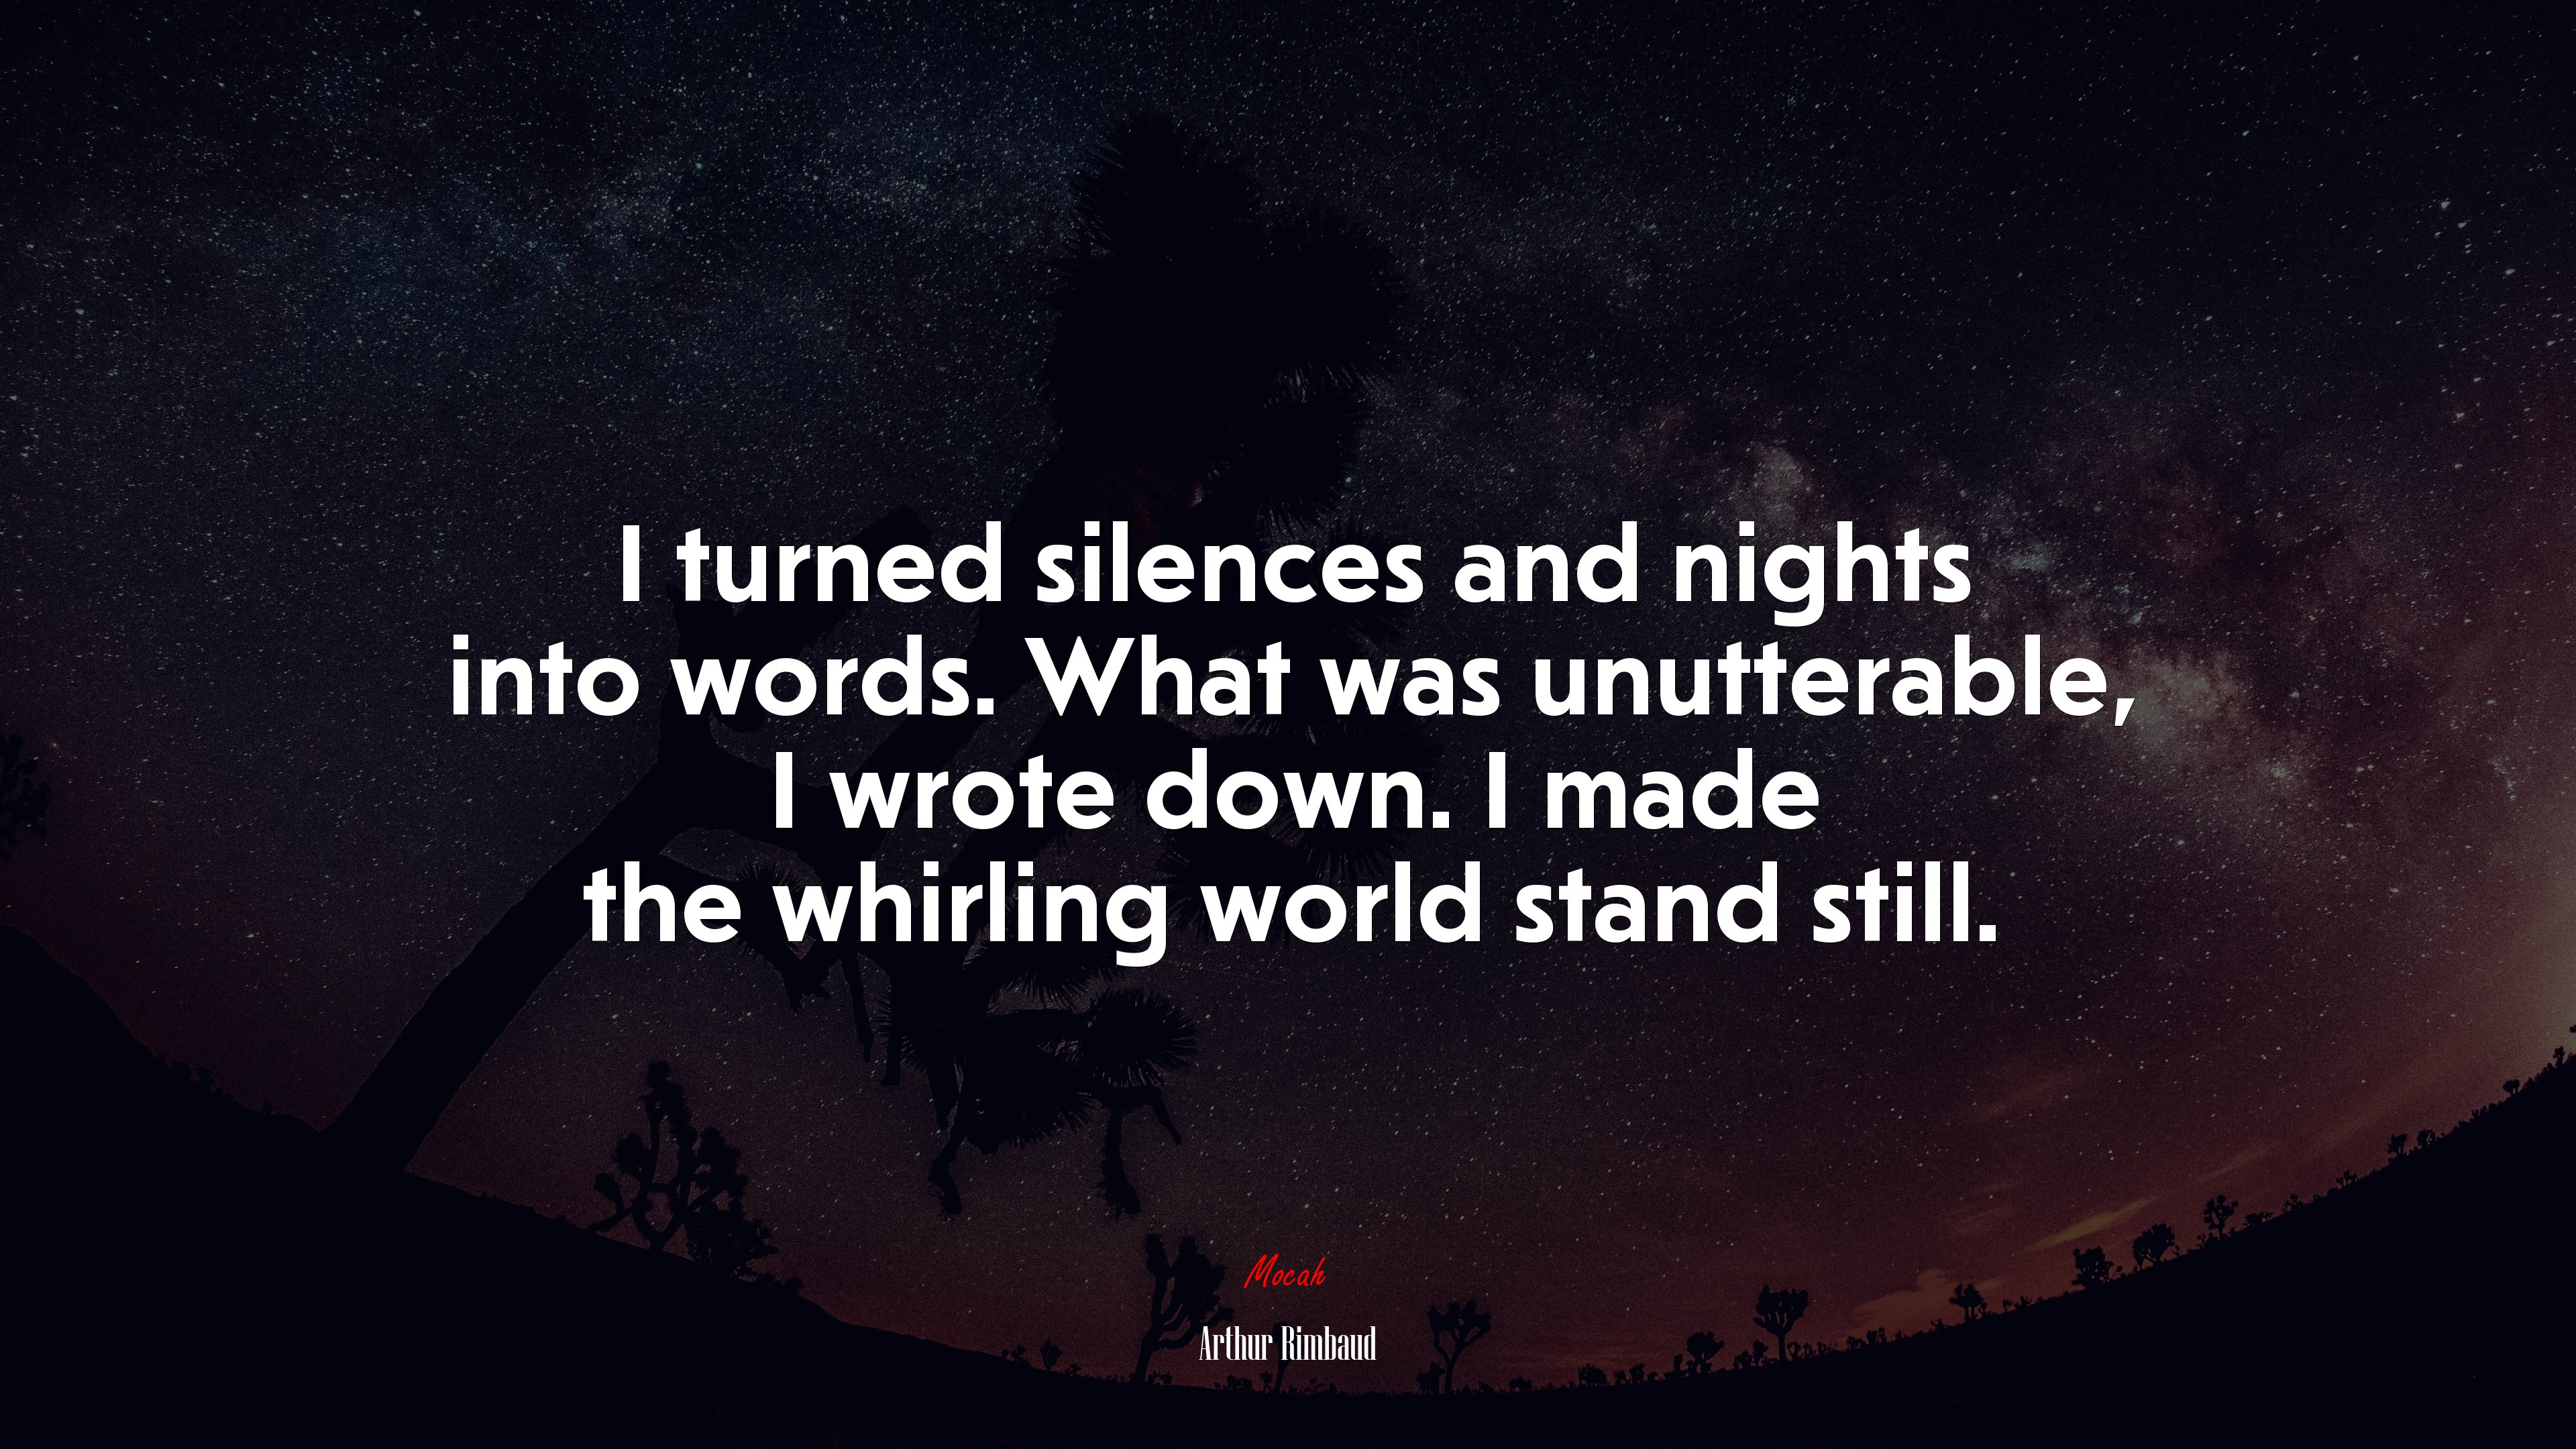 I turned silences and nights into words what was unutterable i wrote down i made the whirling world stand still arthur rimbaud quote